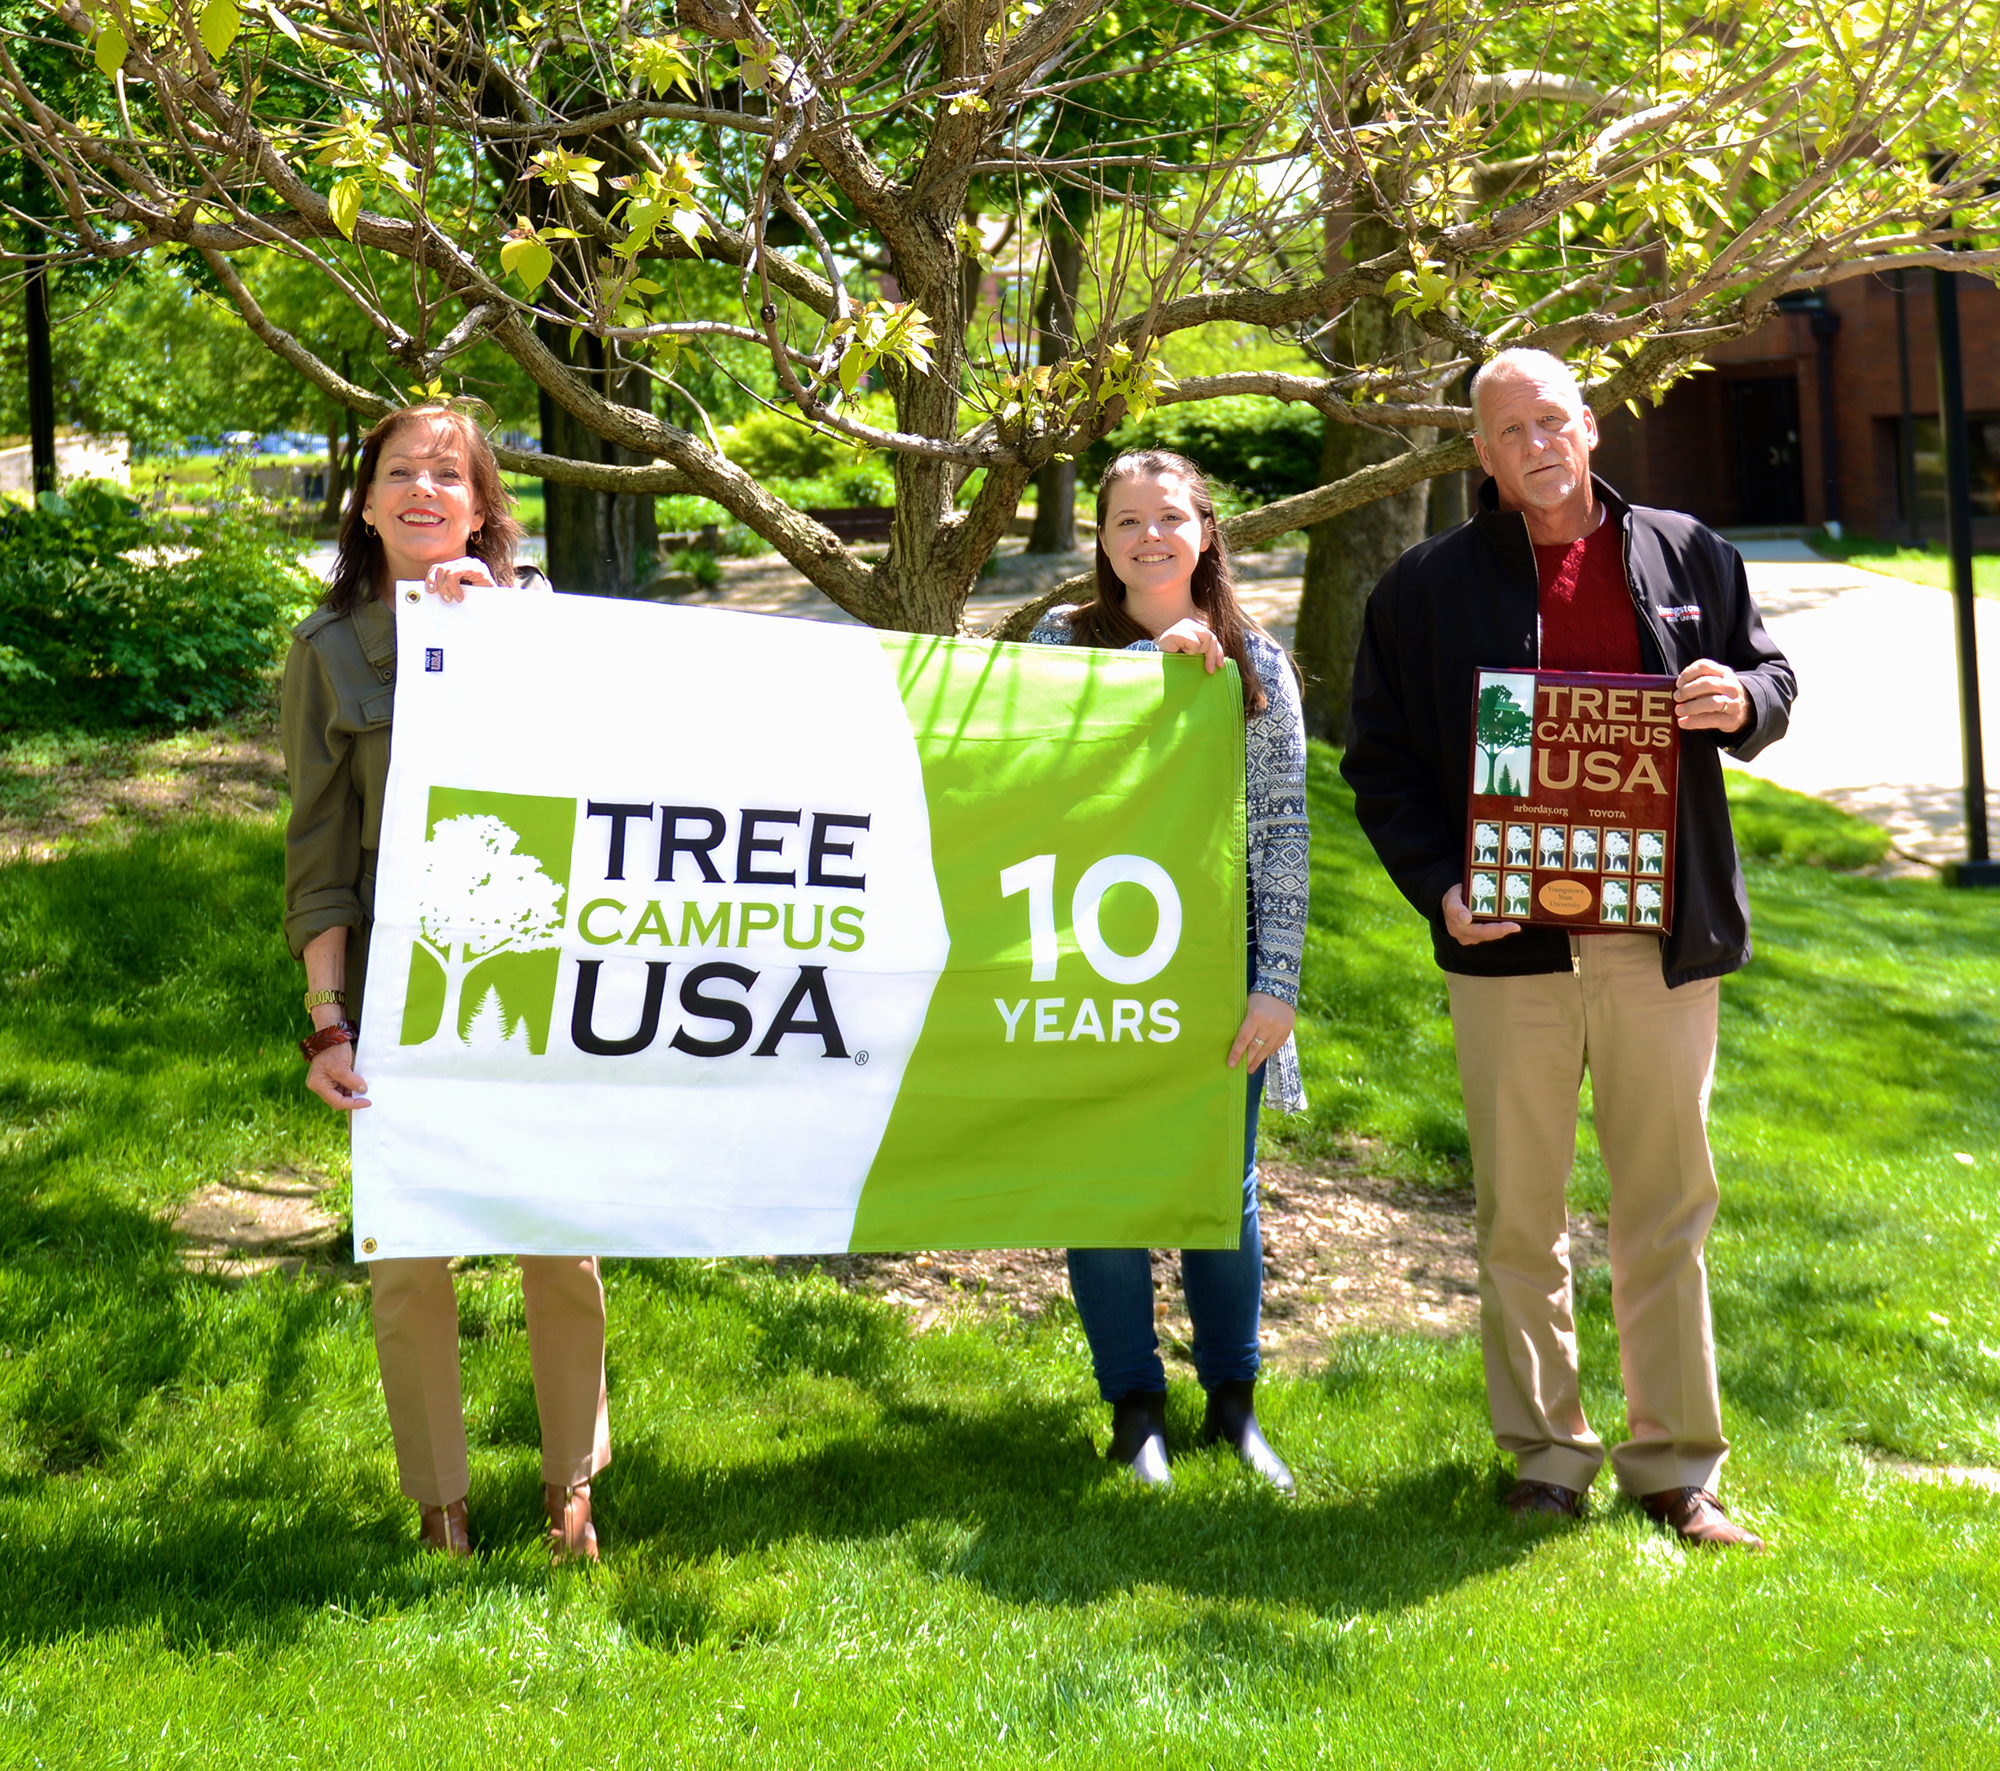 Celebrating YSU’s 10th year as a Tree Campus USA are members of the Campus Beautification Initiative Working Group, from the left, Catherine Cala, Madeline Rosile (student member) and David Ewing, standing in front of a Golden Catalpa Catalpa bignonioides ‘Aurea’, a donor tree representing one of the 17 new species on campus.